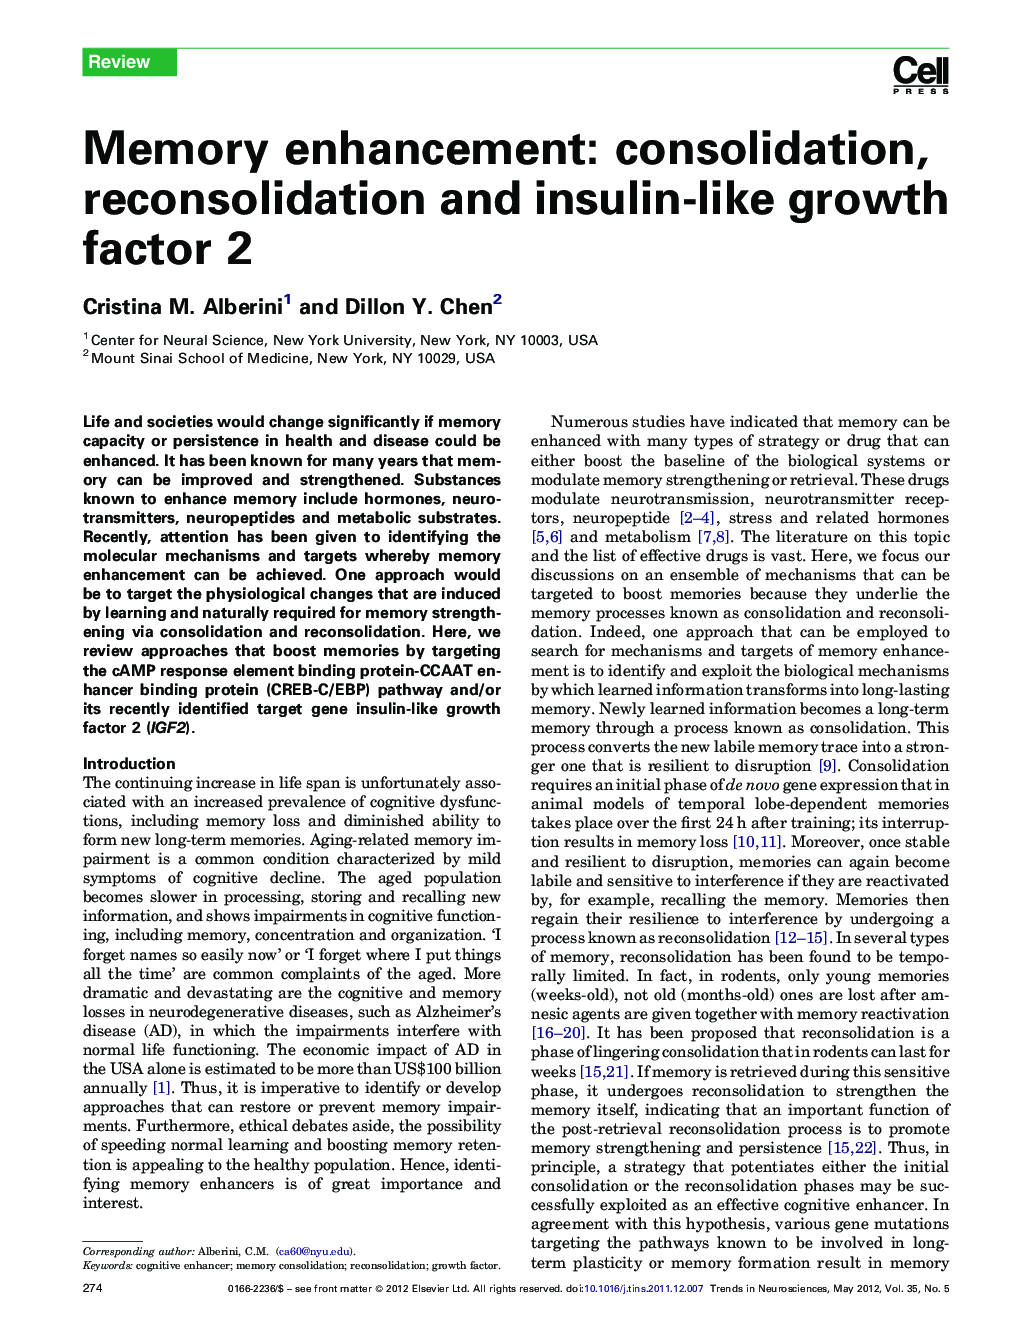 Memory enhancement: consolidation, reconsolidation and insulin-like growth factor 2